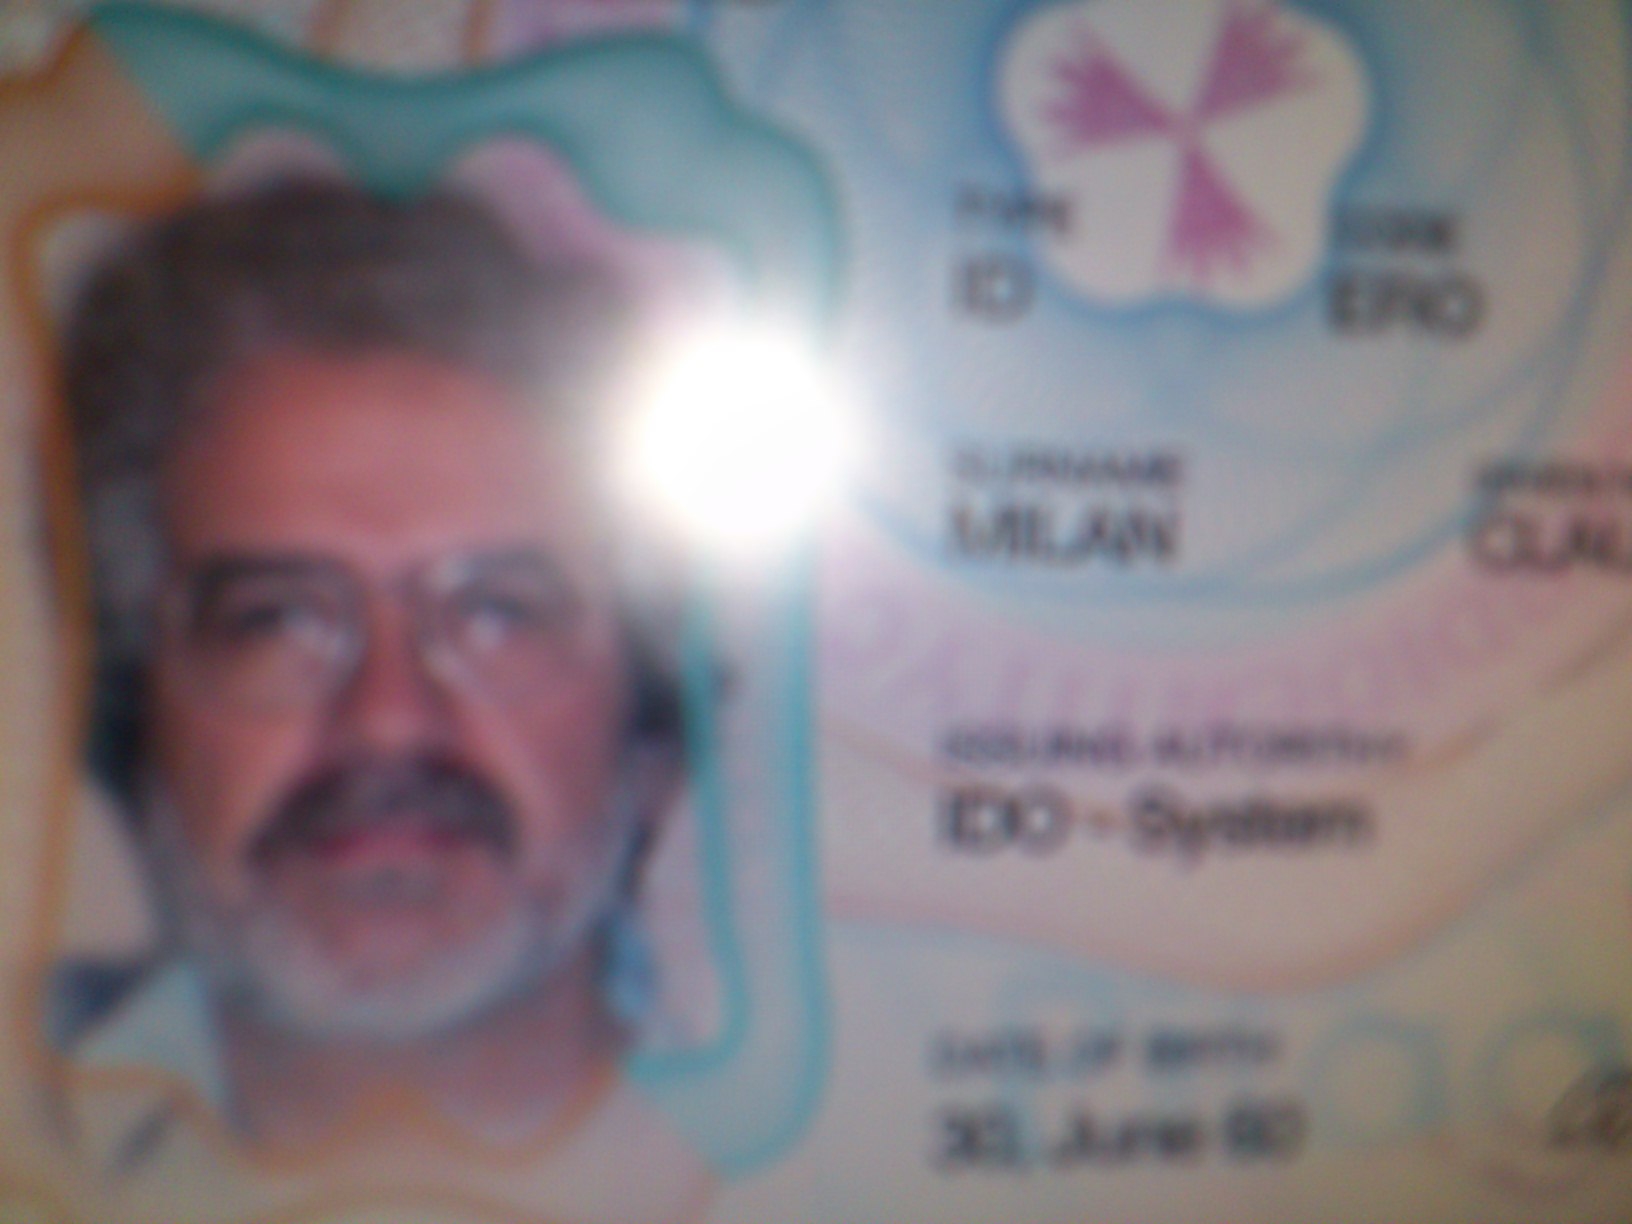 An unacceptable blurry/out of focus ID, with details masked: